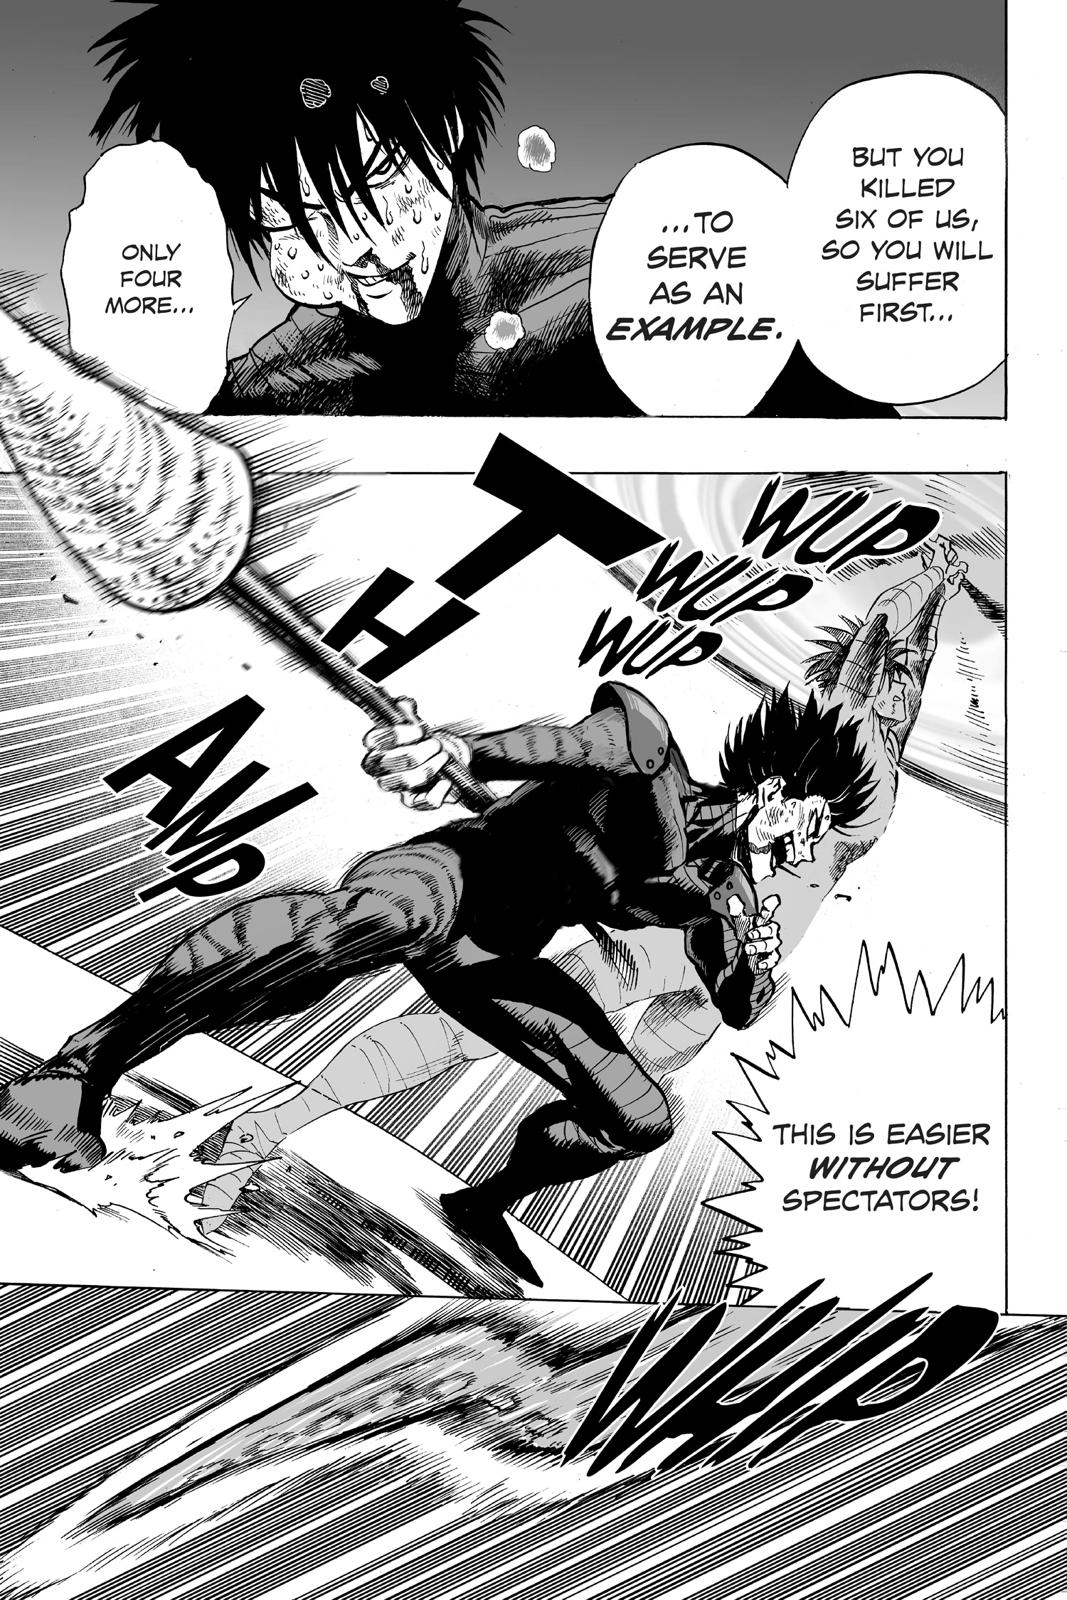 One-Punch Man, Punch 23 image 19